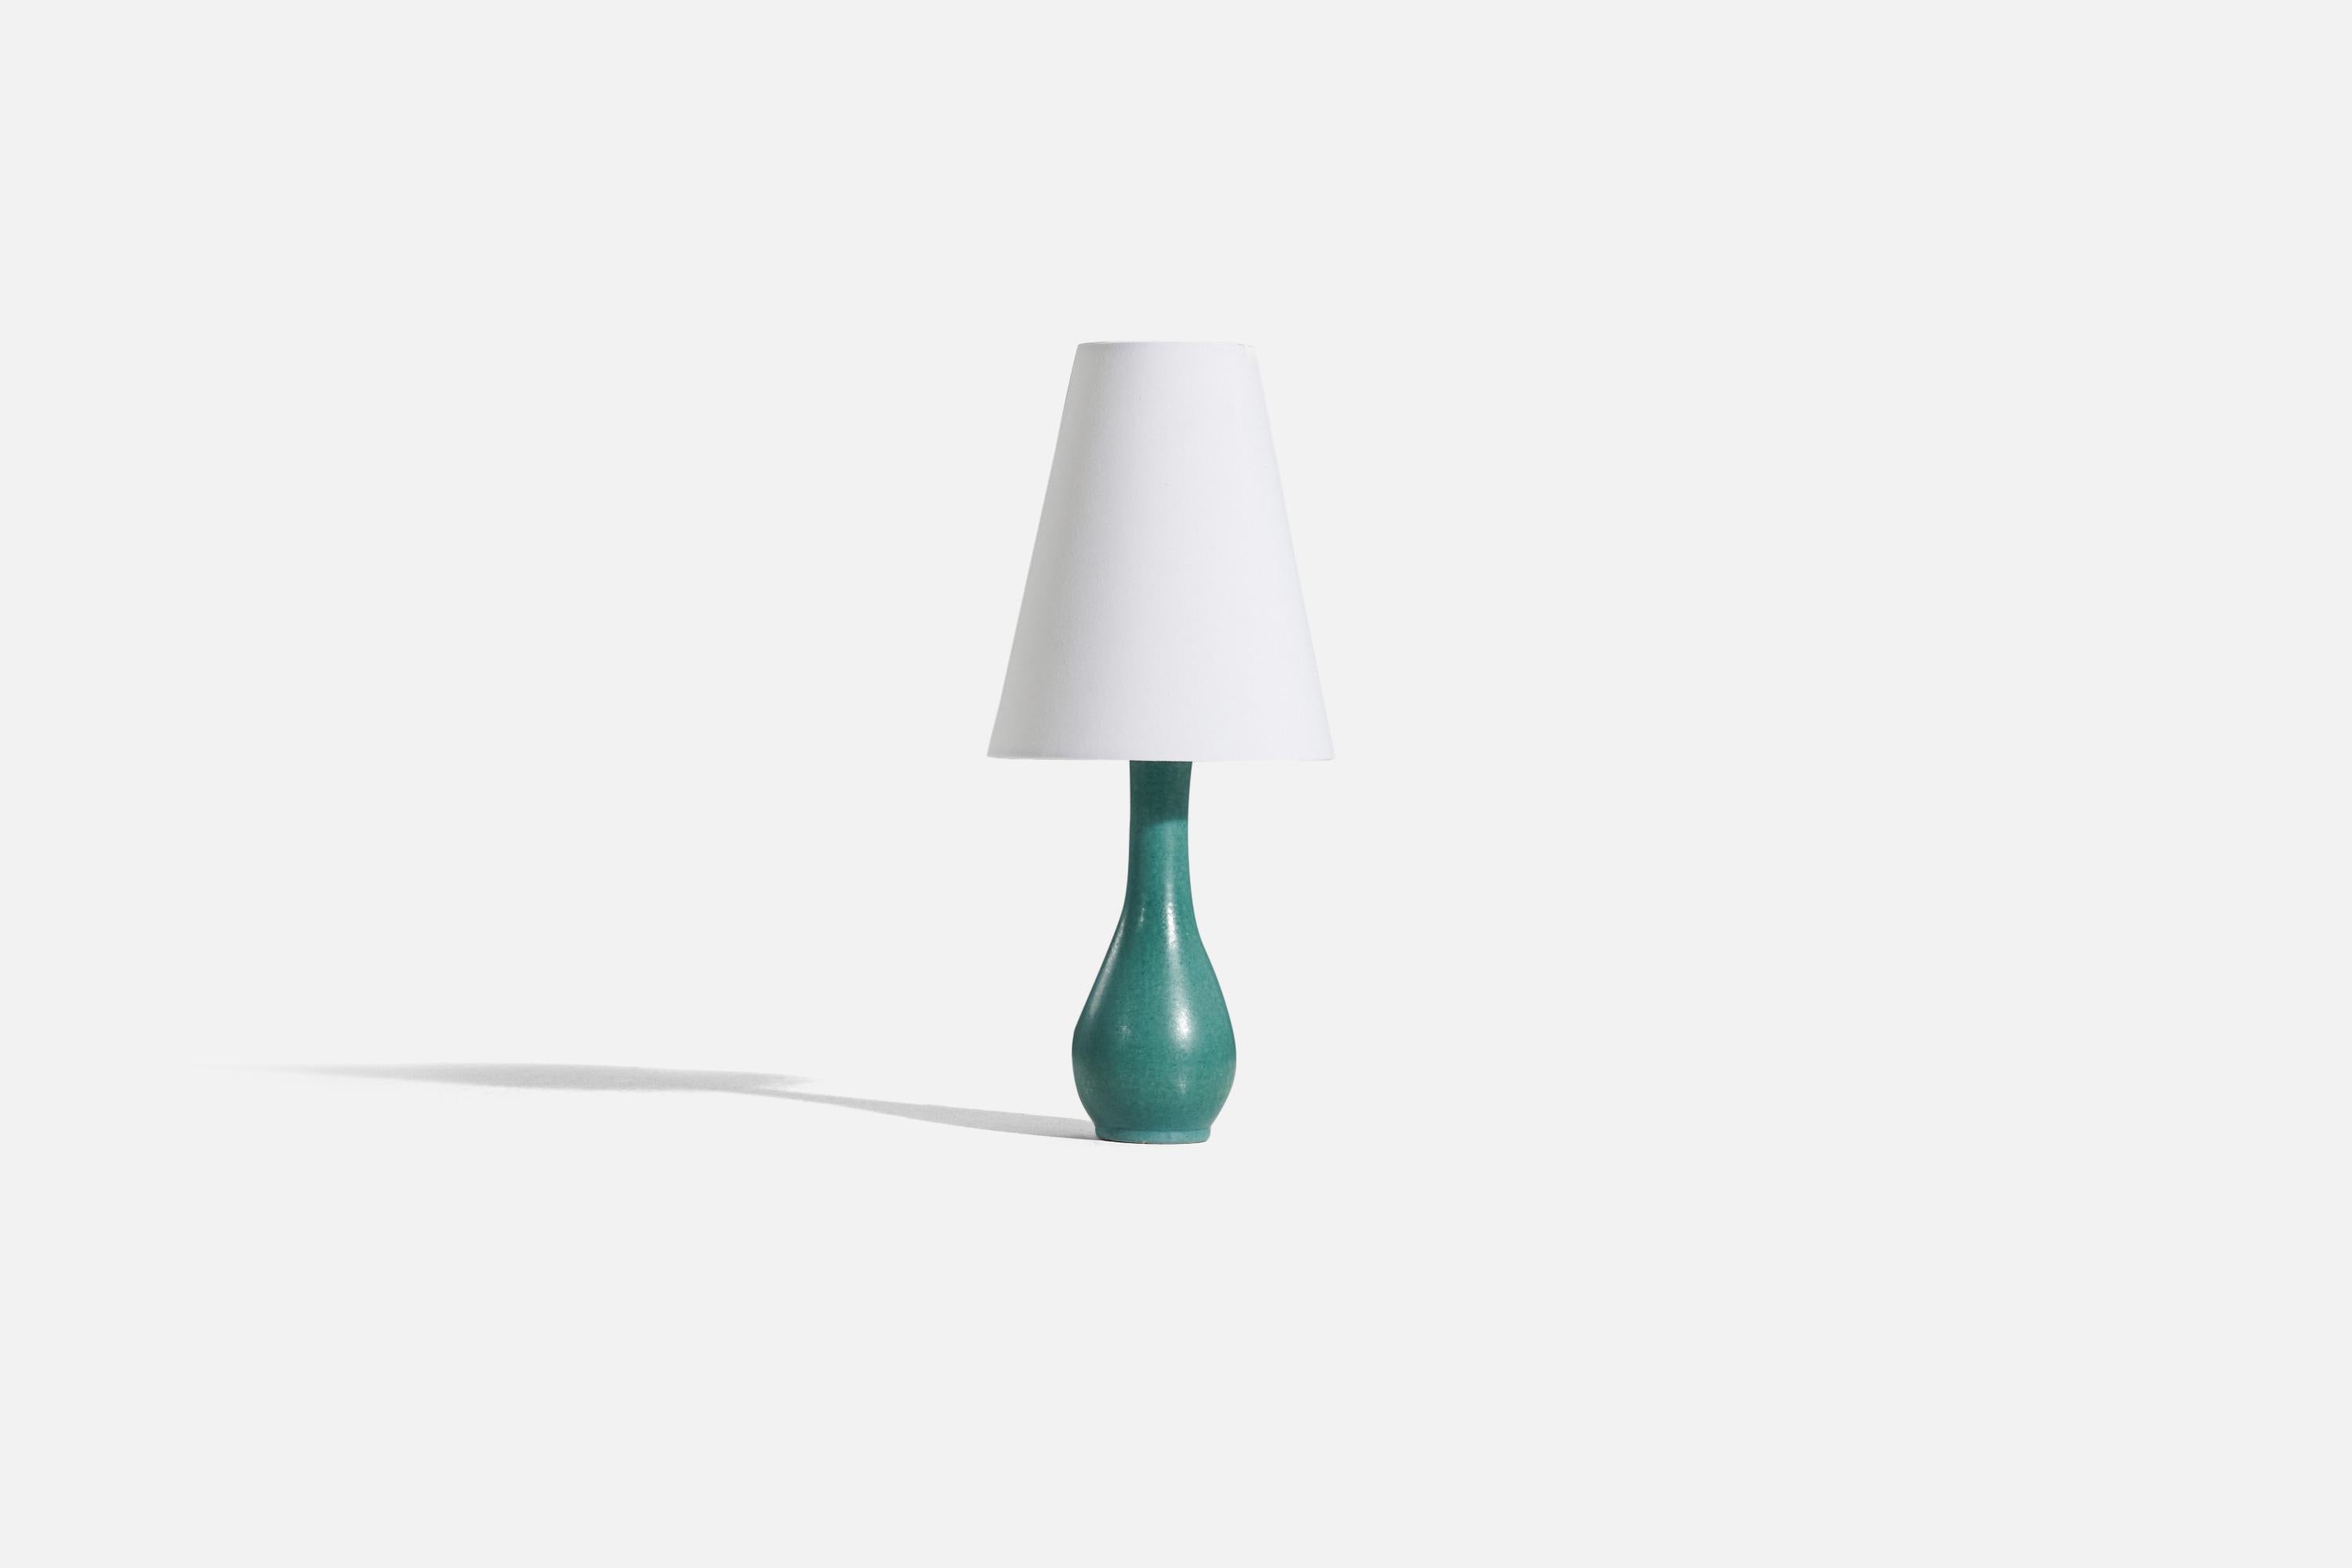 A green, glazed stoneware table lamp designed and produced by Knabstrup Keramik, Denmark, c. 1960s. 

Sold without lampshade. 
Dimensions of Lamp (inches) : 8.8125 x 2.75 x 2.75 (H x W x D)
Dimensions of Shade (inches) : 2.75 x 5.5 x 6.75 (T x B